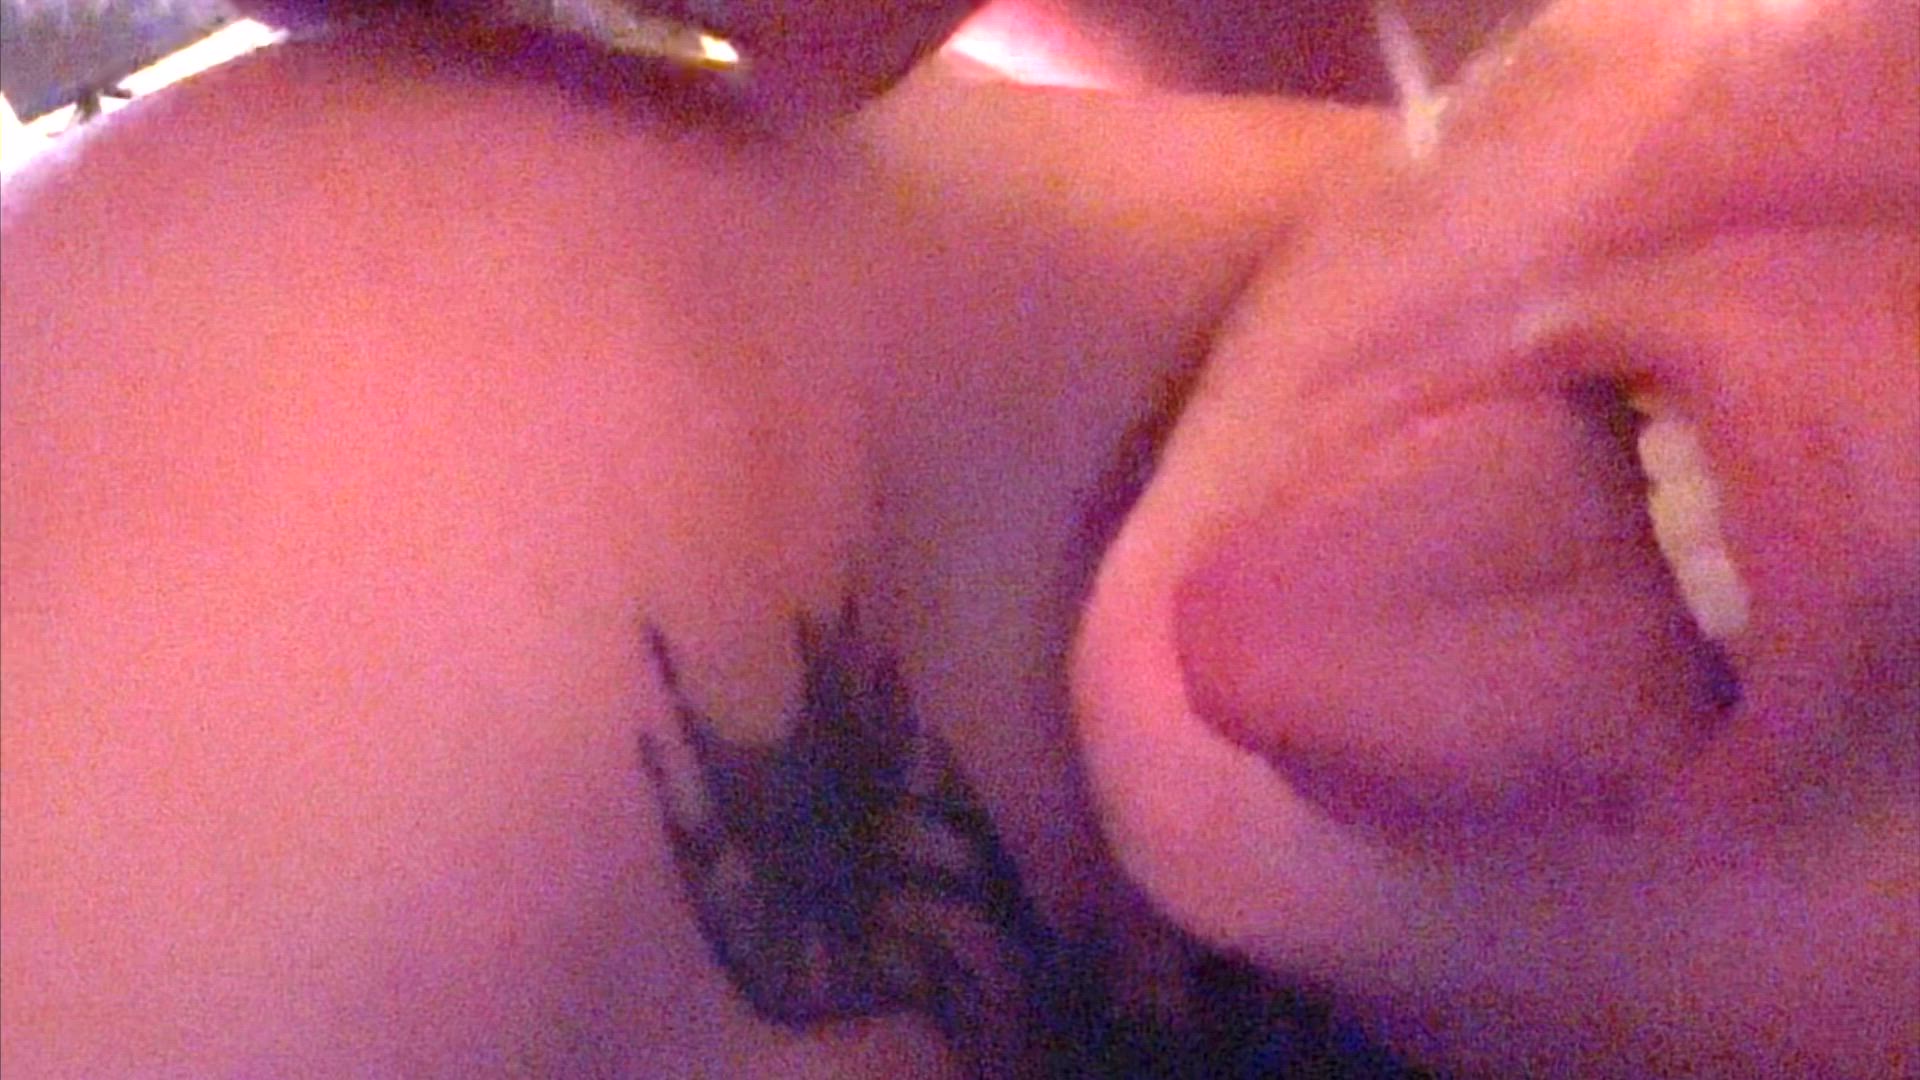 Cumshot porn video with onlyfans model Dwelling.Demons <strong>@beautyandthebeard6xxx</strong>